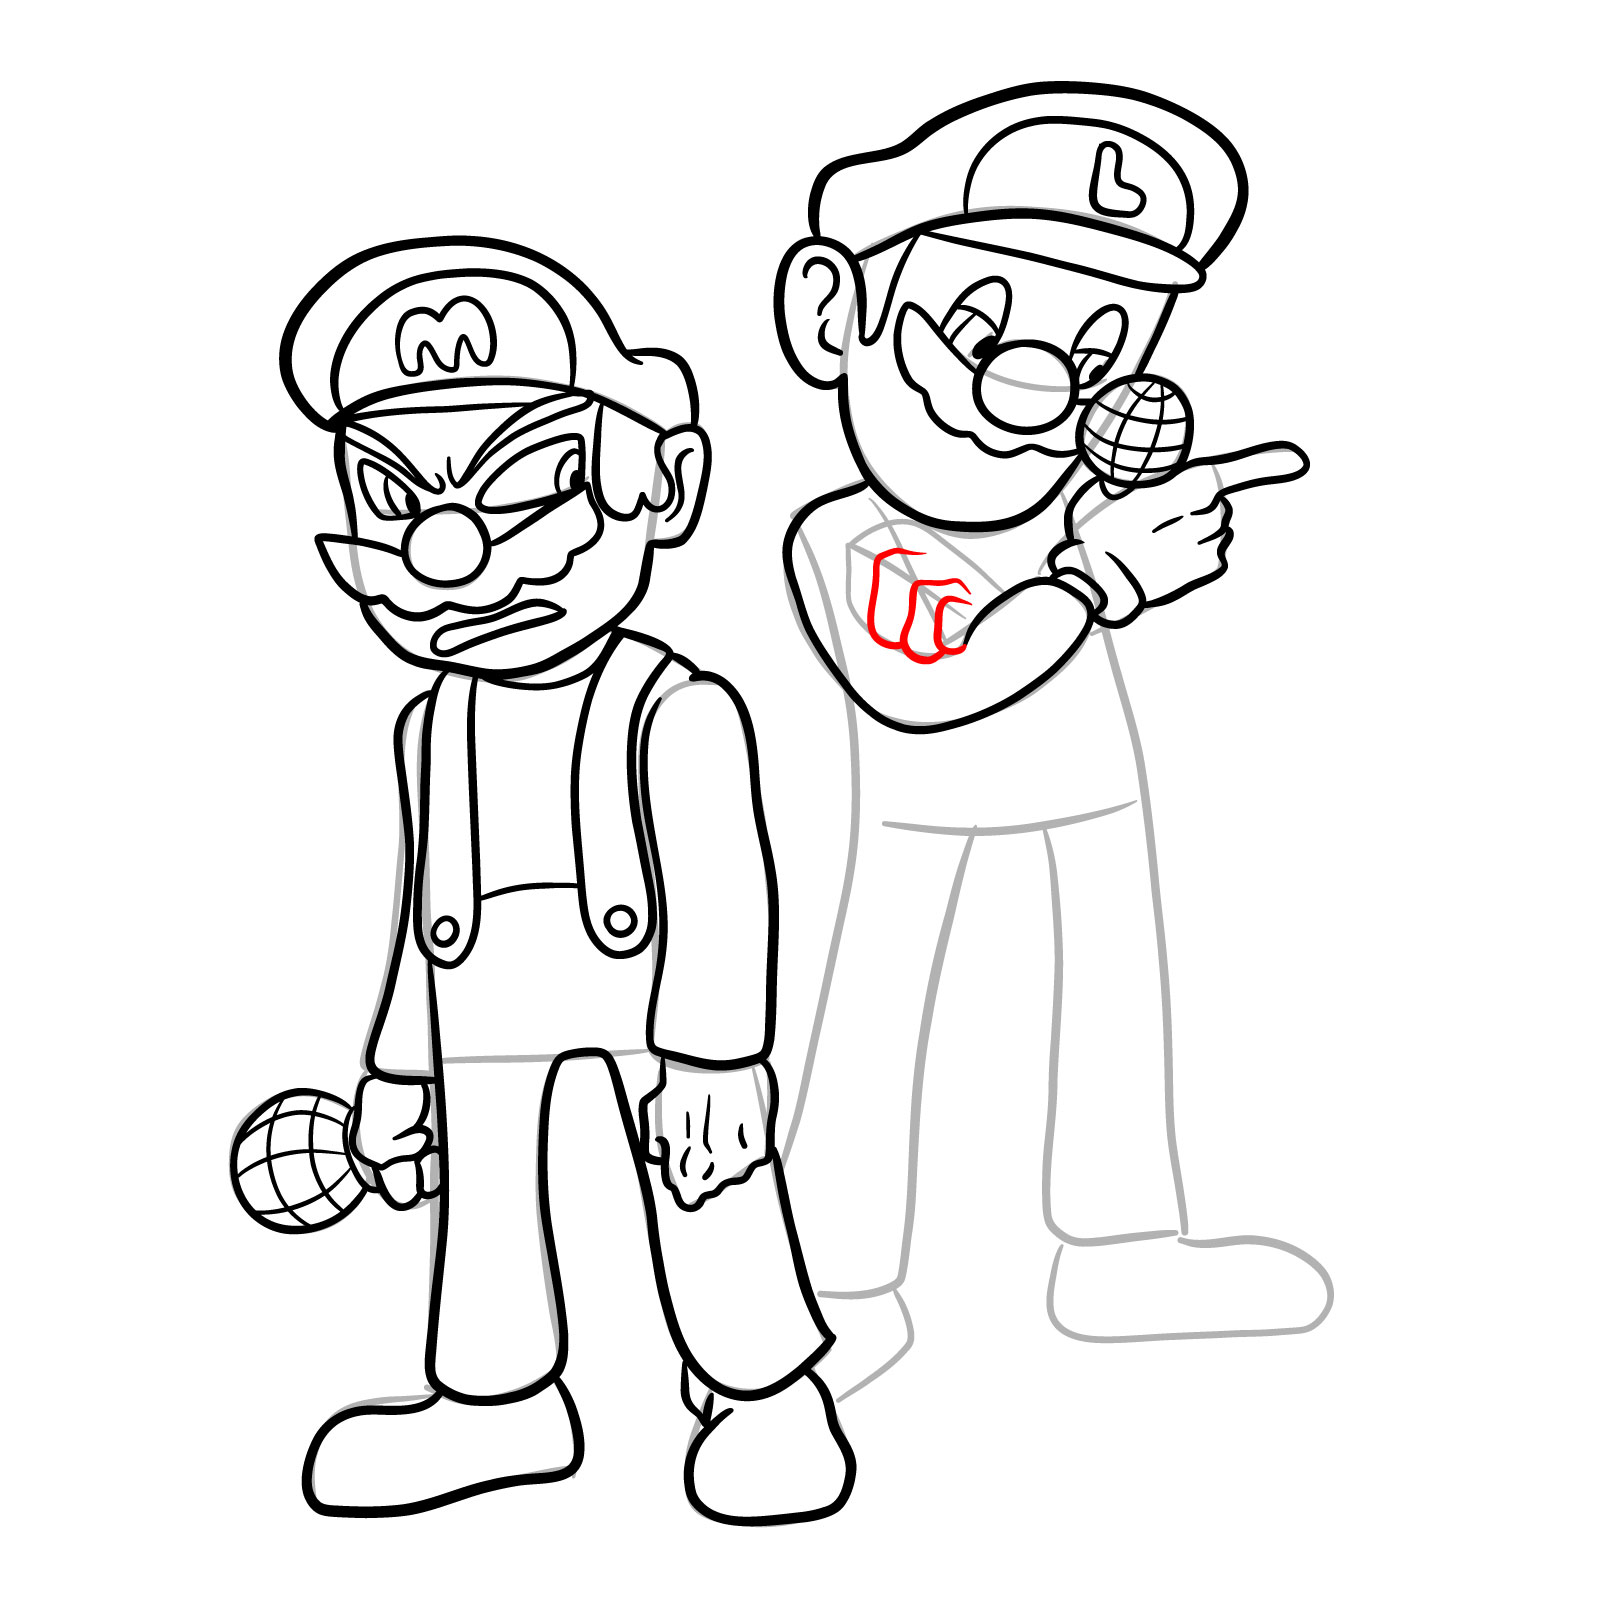 How to draw Mario and Luigi from Tails Gets Trolled - step 36